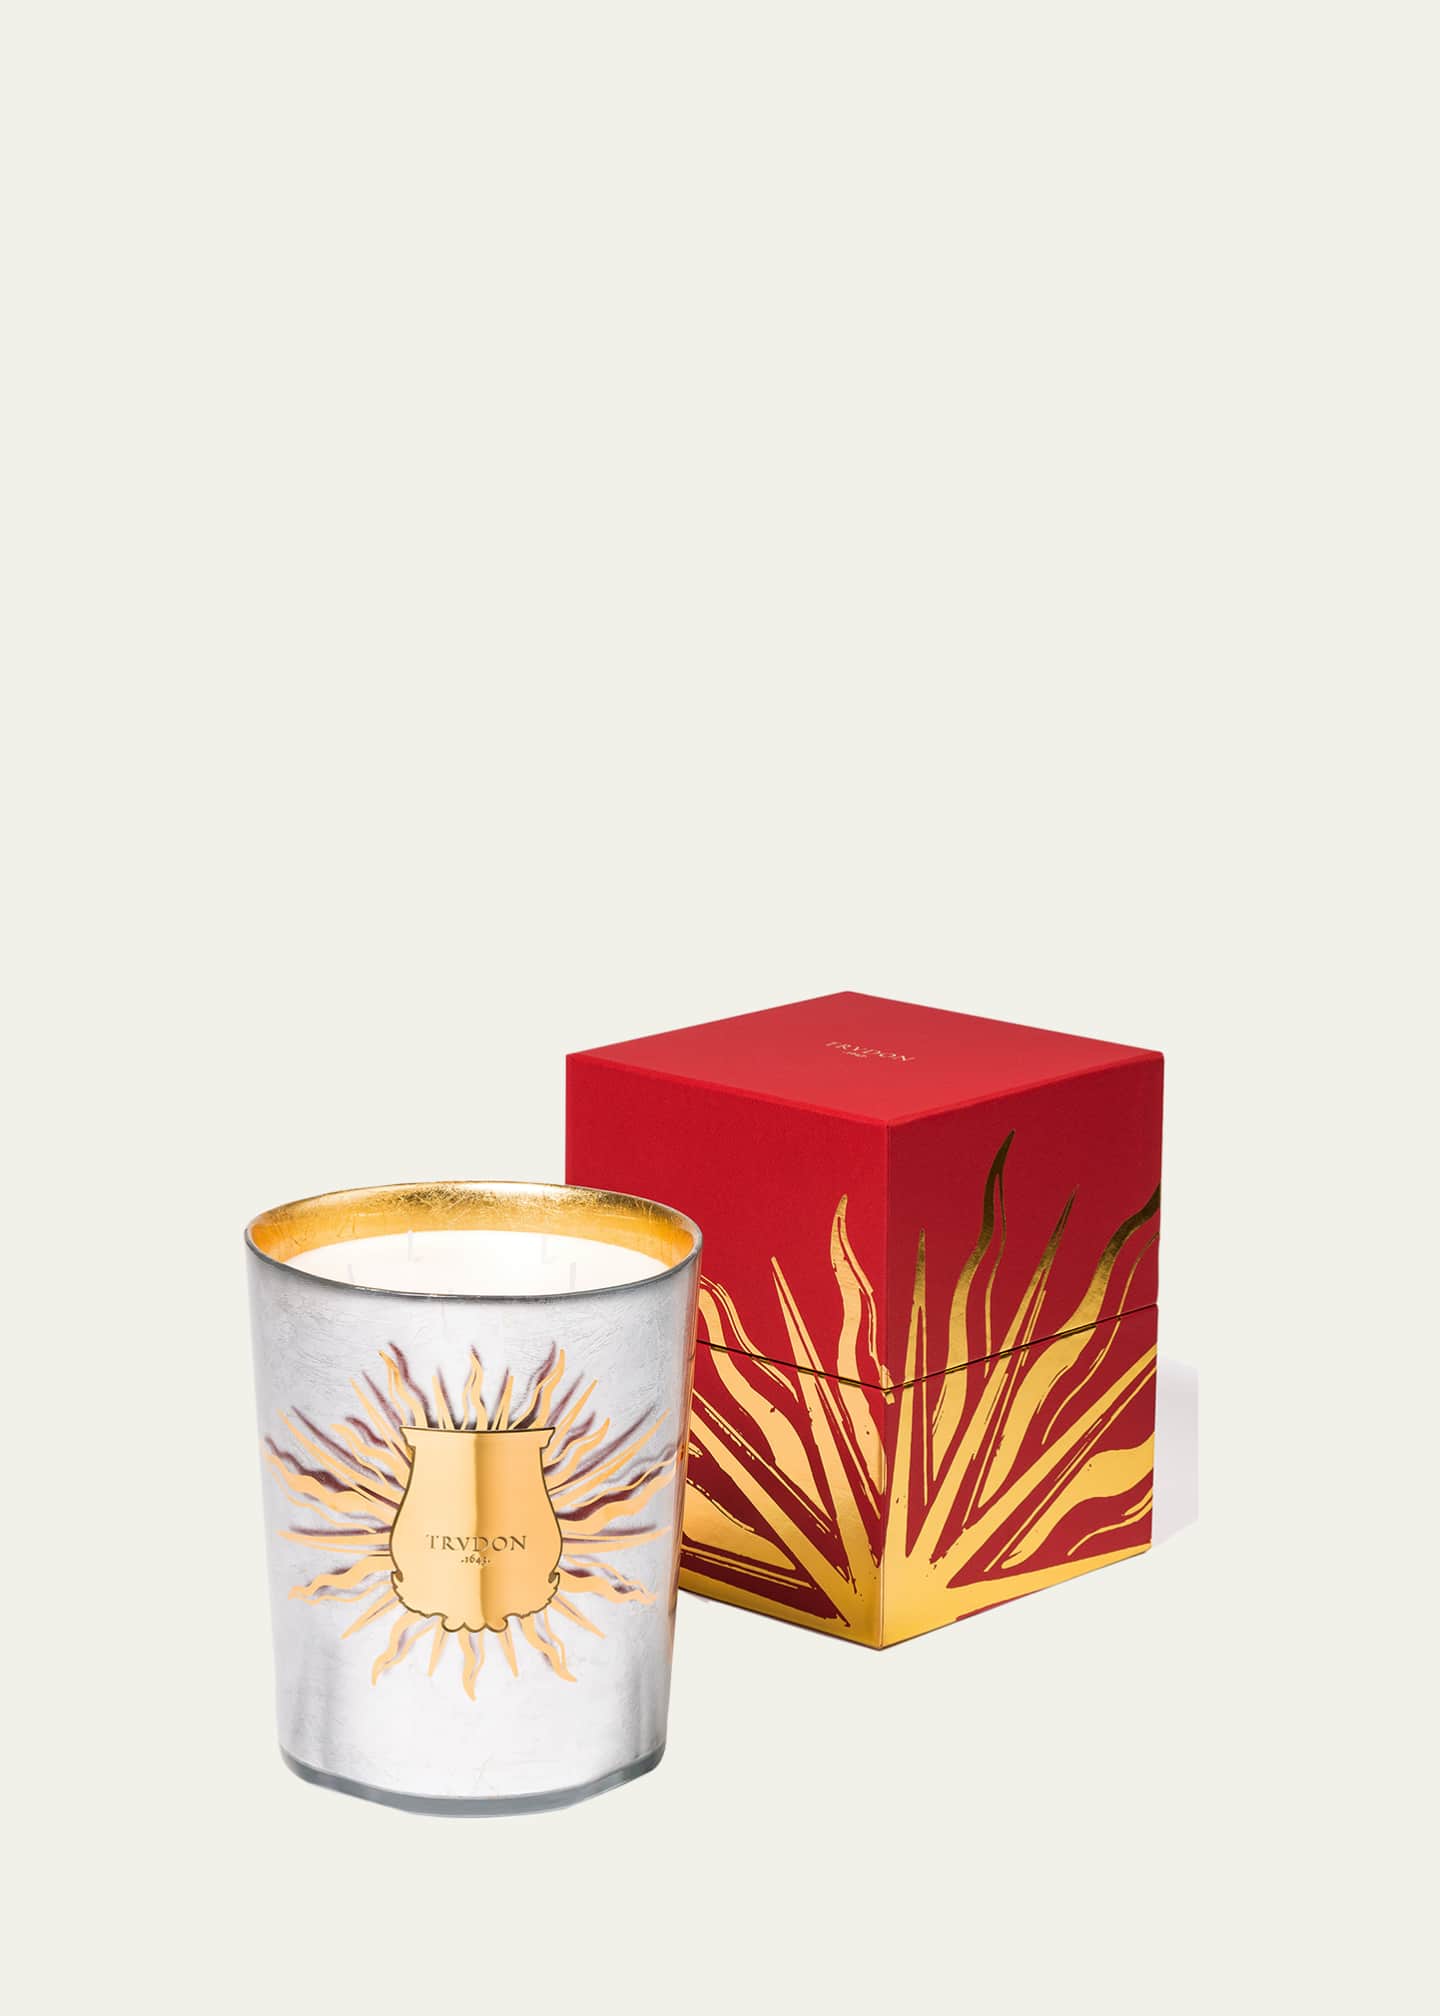 Trudon Altair Great Candle, 2.8 kg - Bergdorf Goodman